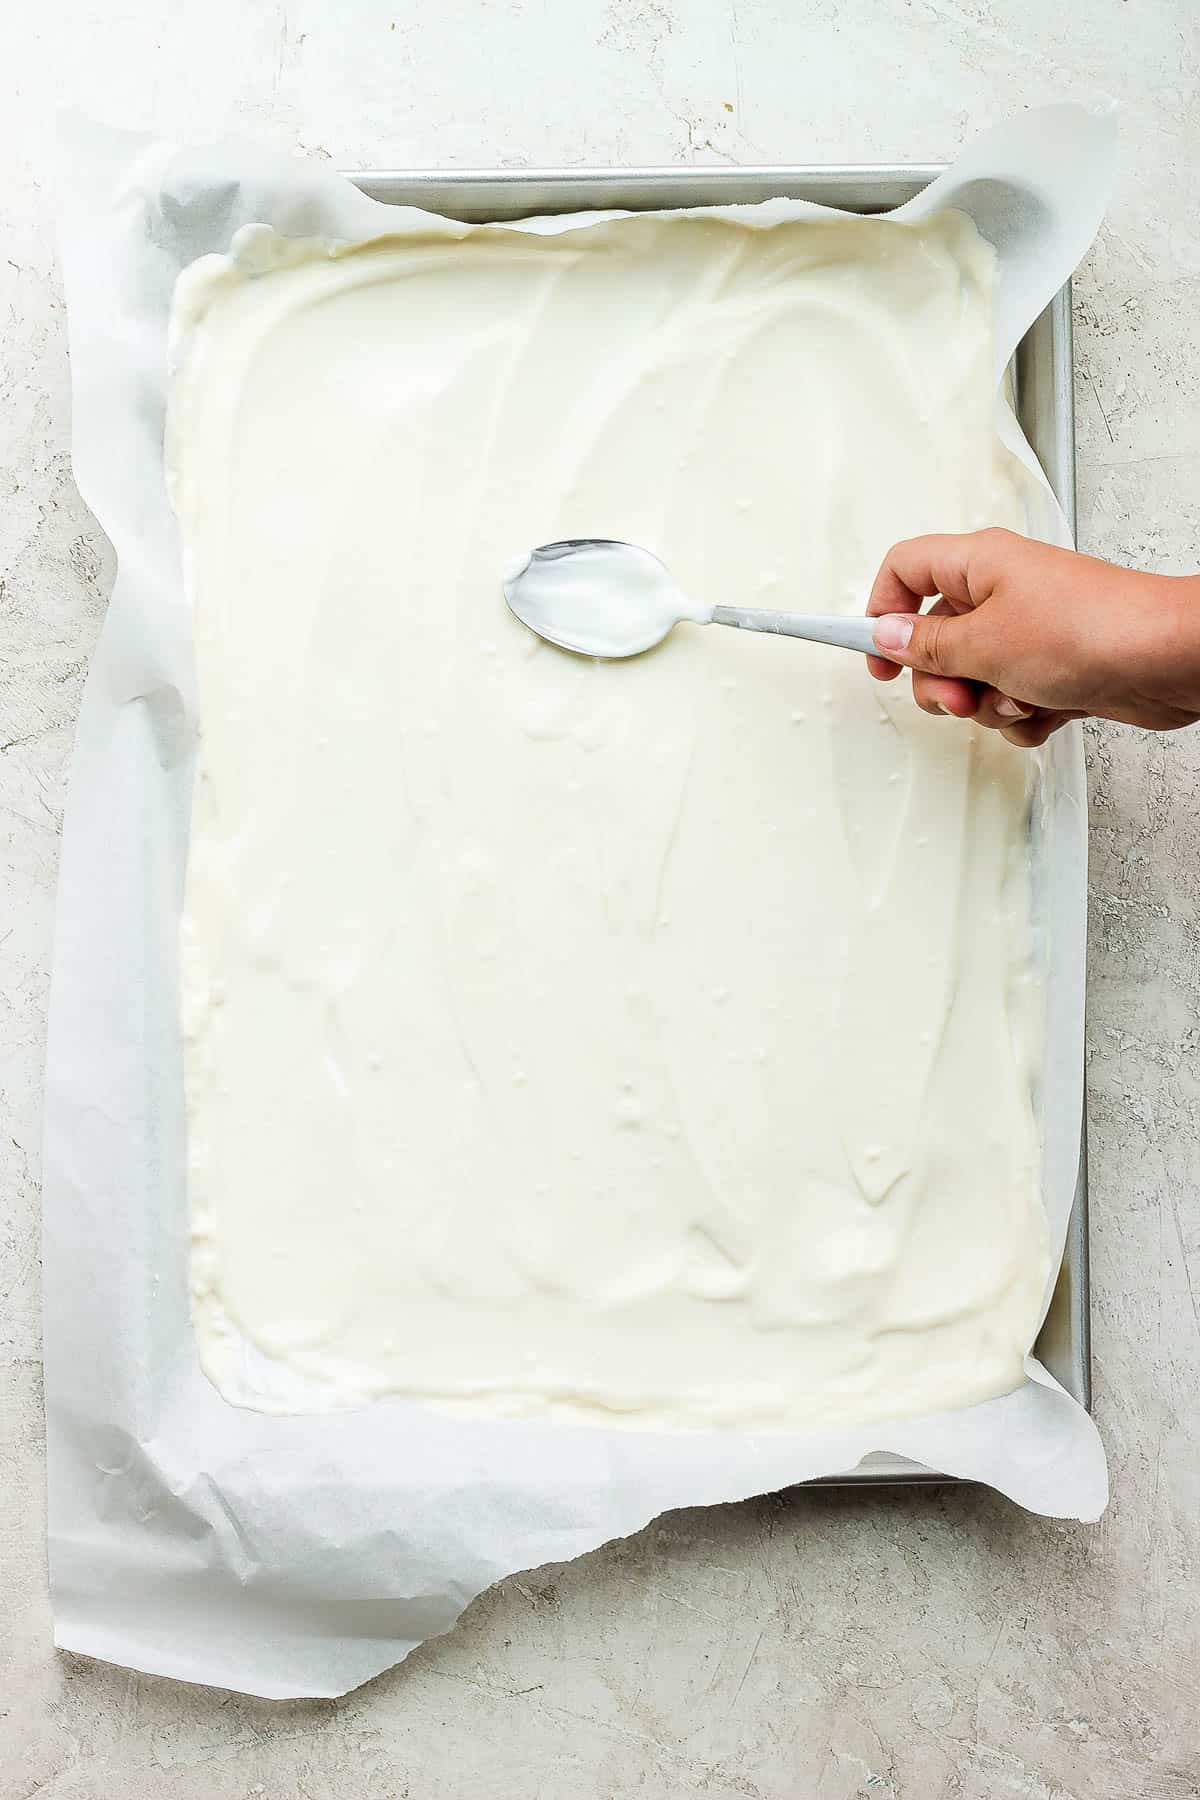 A spoon smoothing out yogurt on a parchment lined baking sheet.